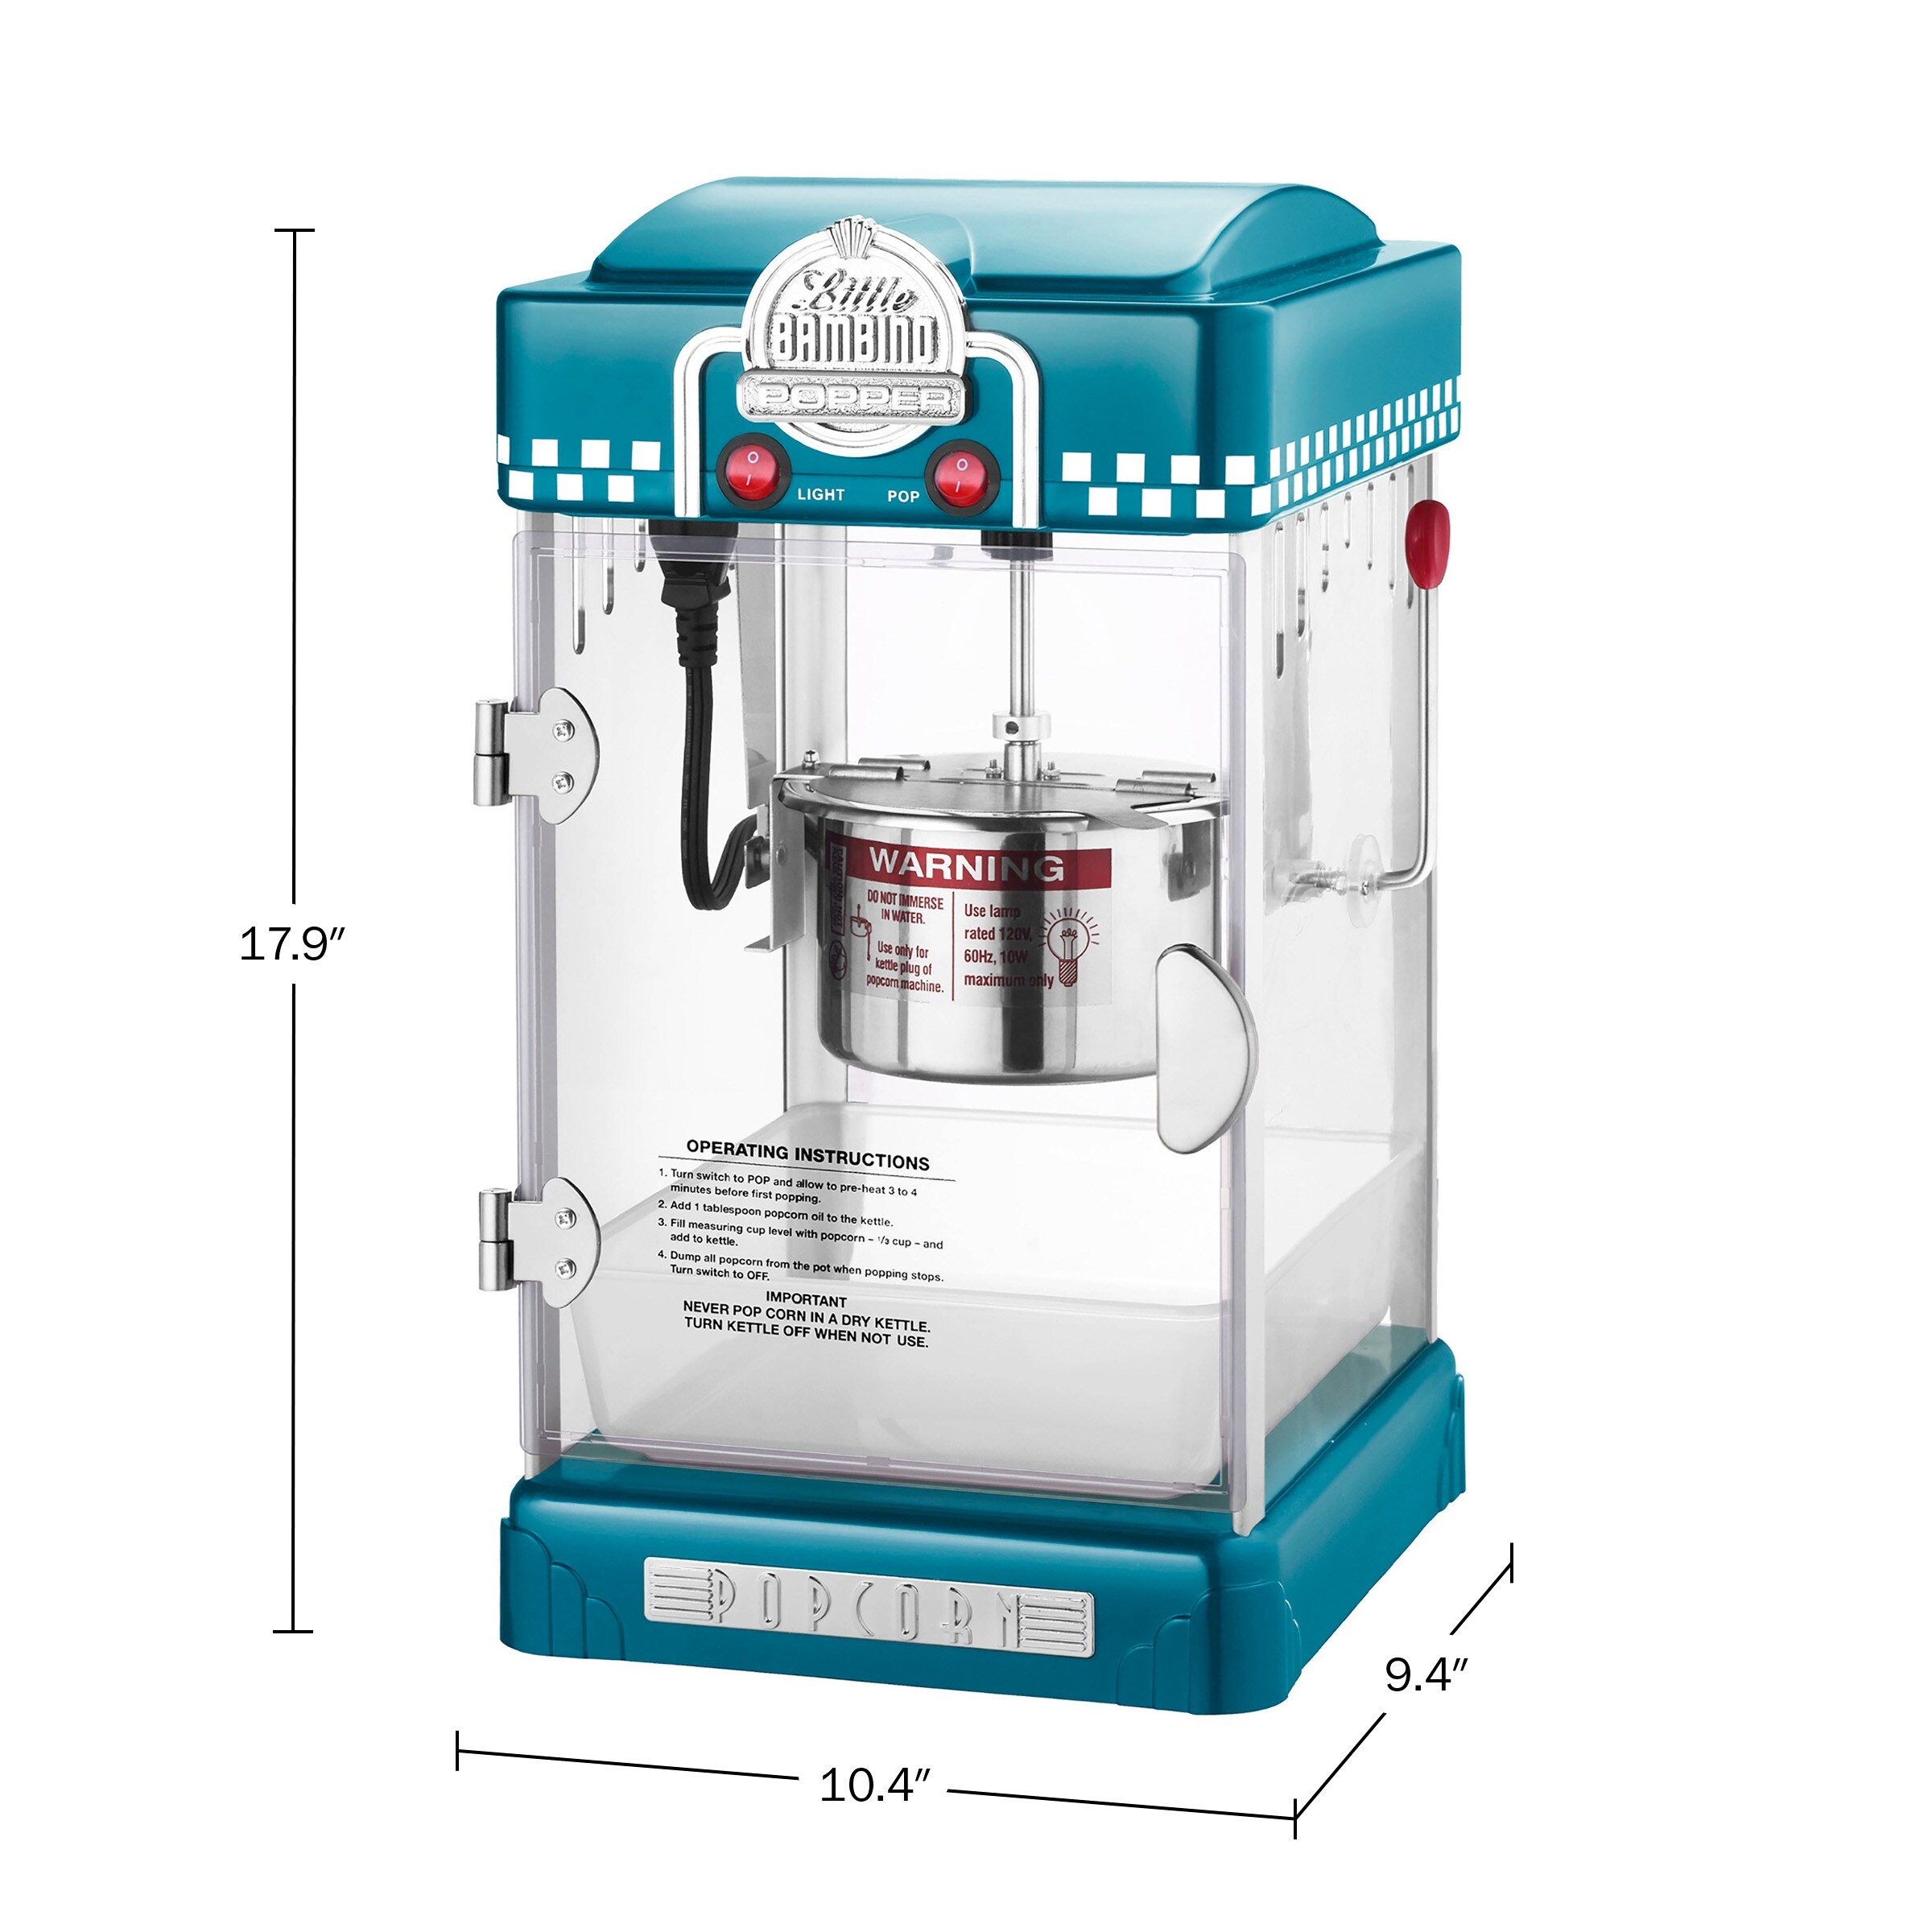 https://ak1.ostkcdn.com/images/products/is/images/direct/a80a31a4616da9e035ba1d131a6c0f31e5cadc19/Little-Bambino-Countertop-Popcorn-Machine-%E2%80%93-2.5oz-Kettle-with-Measuring-Spoon%2C-Scoop%2C-and-25-Serving-Bags-%28Blue%29.jpg